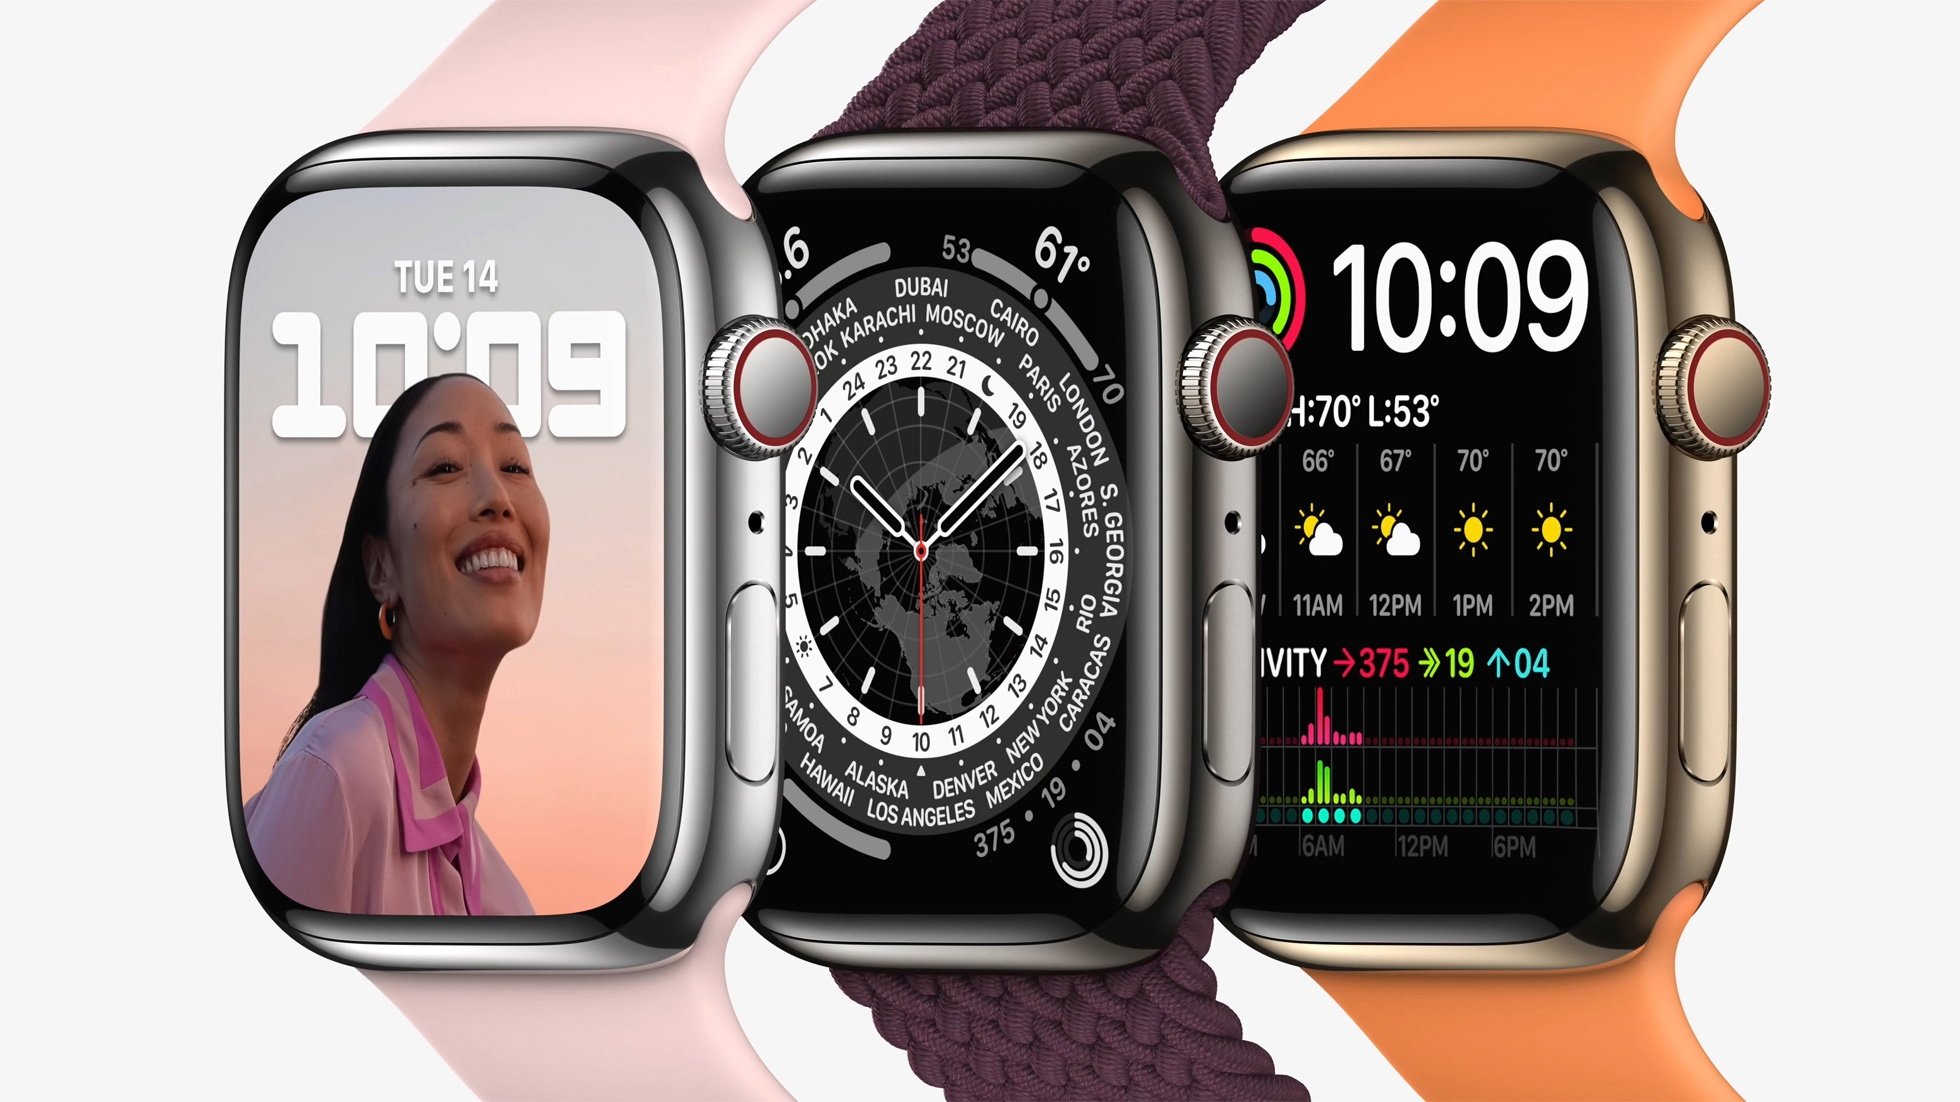 A handout photo made available by Apple Inc. shows the new Apple Watch Series 7, featuring a larger, more advanced display in silver, graphite, and gold stainless steel during the Apple Special Event at Apple Park in Cupertino, California, U.S., Sept. 14, 2021. (EPA / Apple handout)